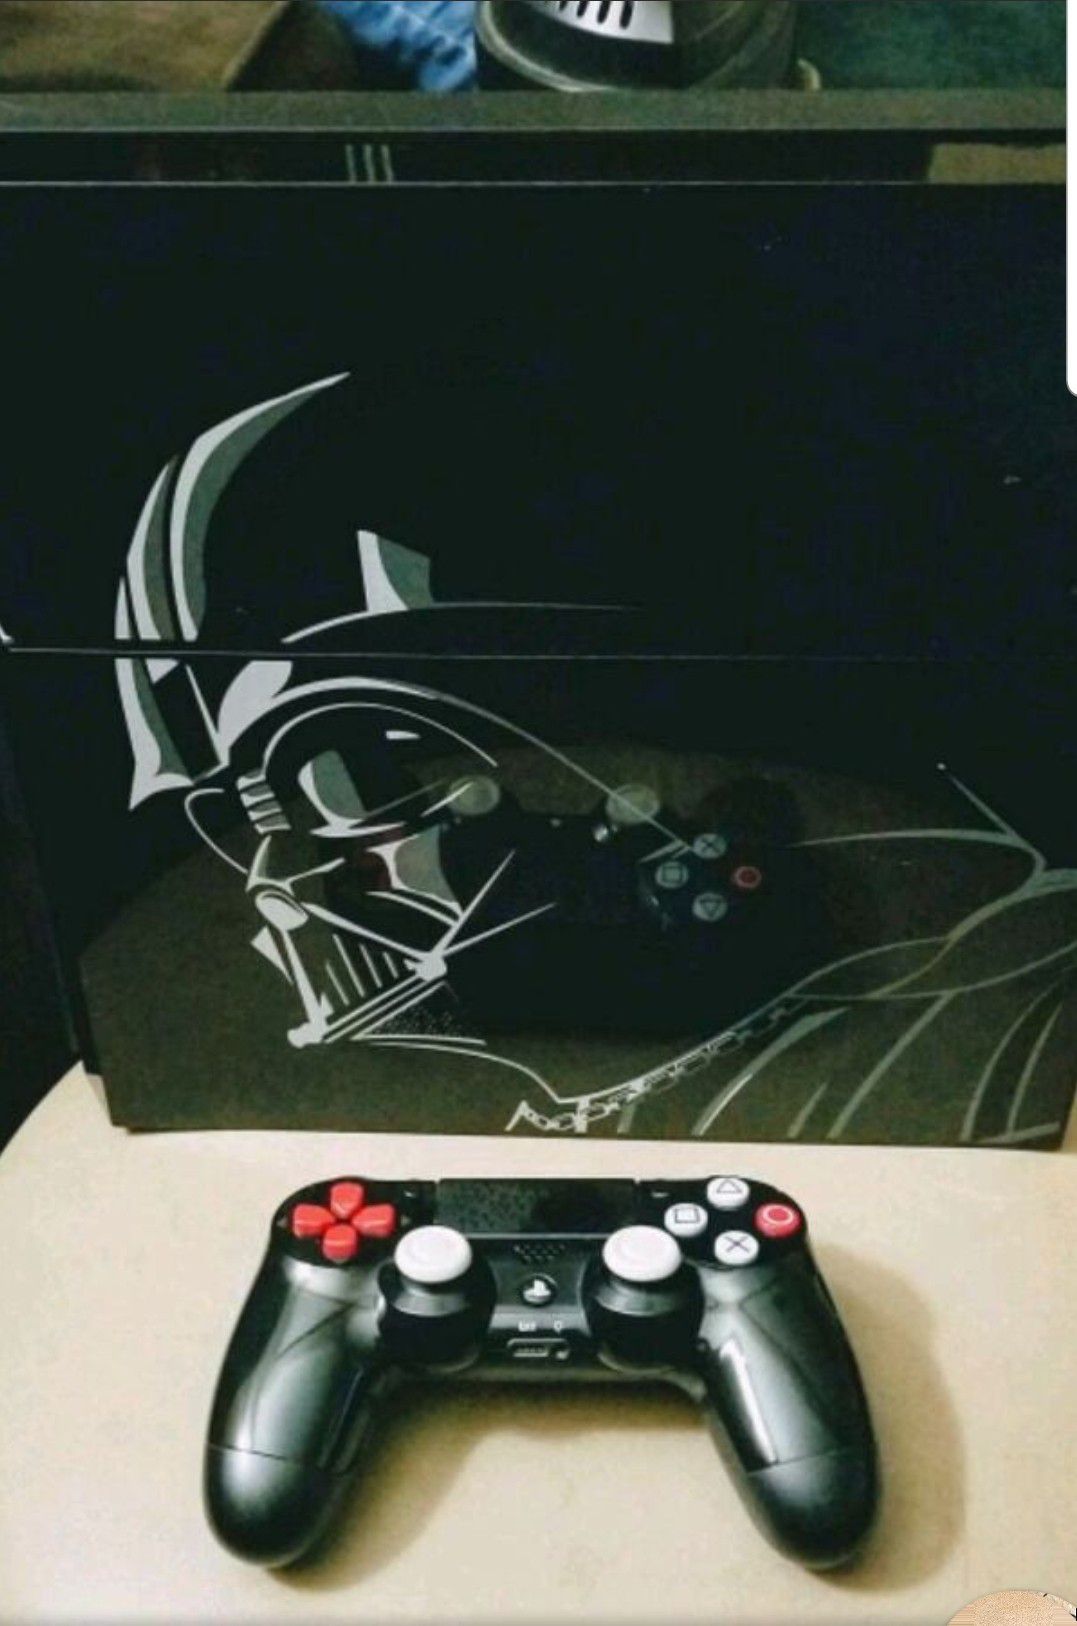 Ps4 STAR WARS In excellent condition. 500gb